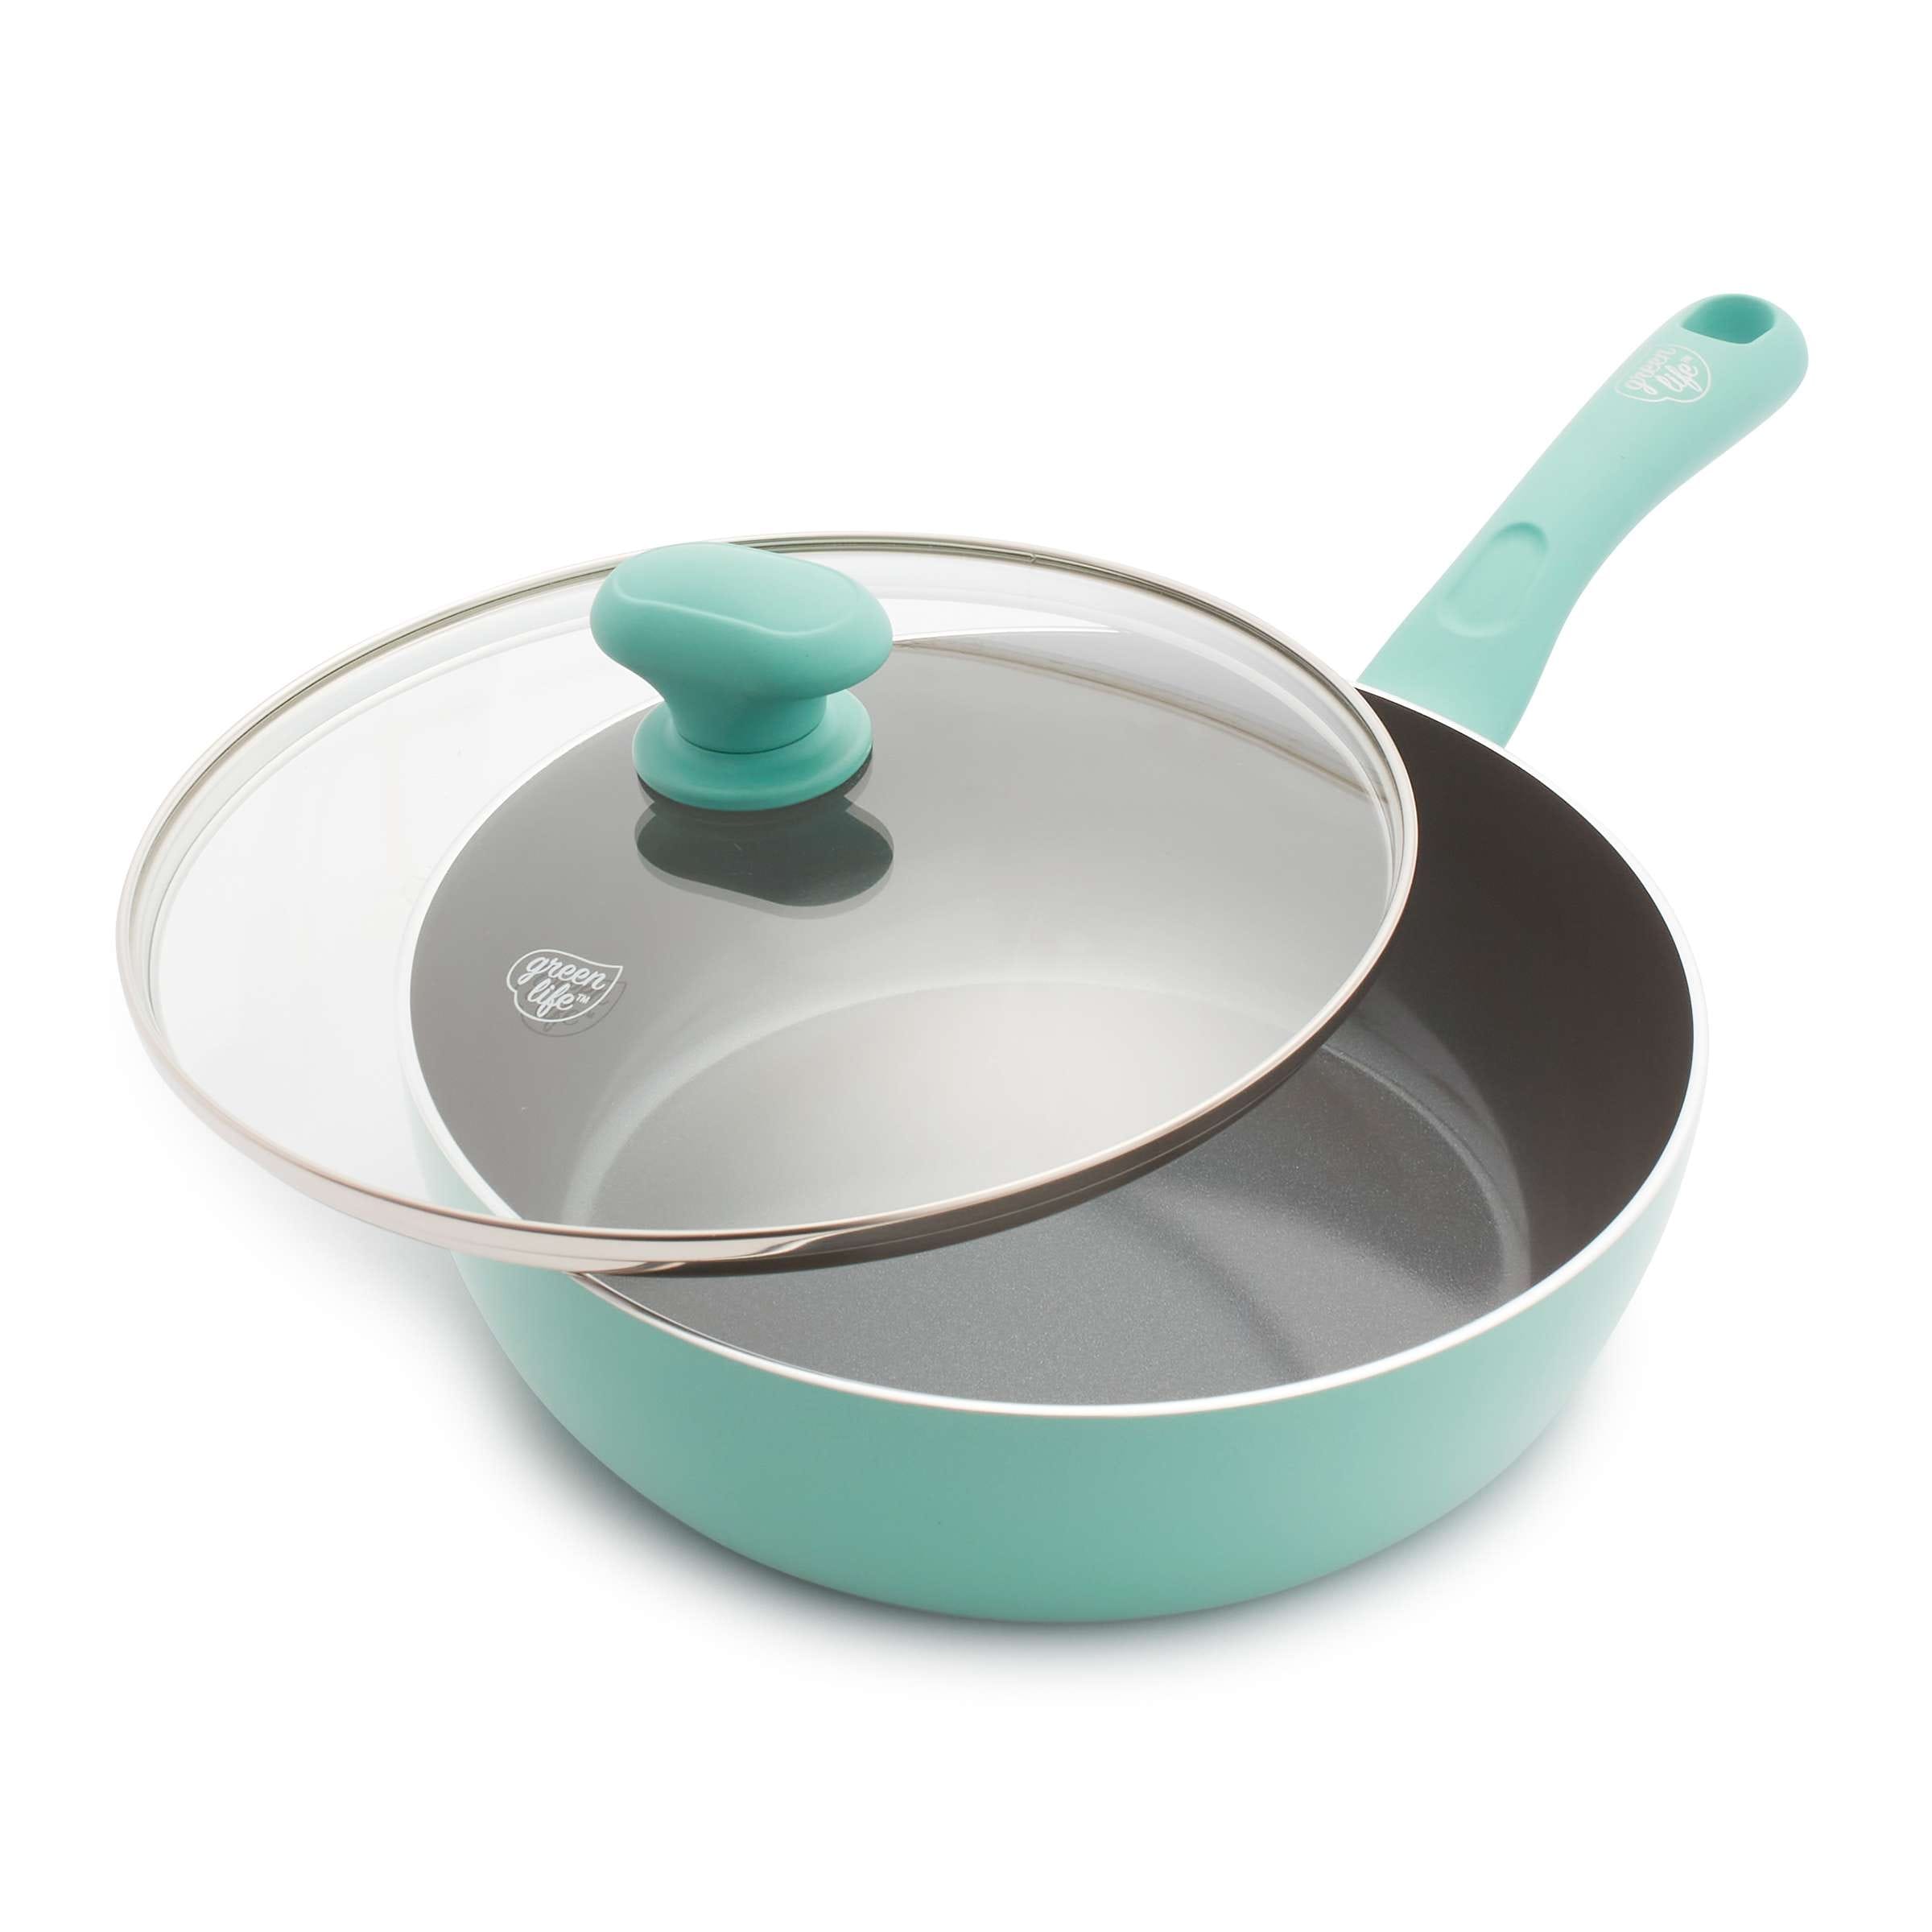 GreenLife  Classic Pro 12-Inch Frypan